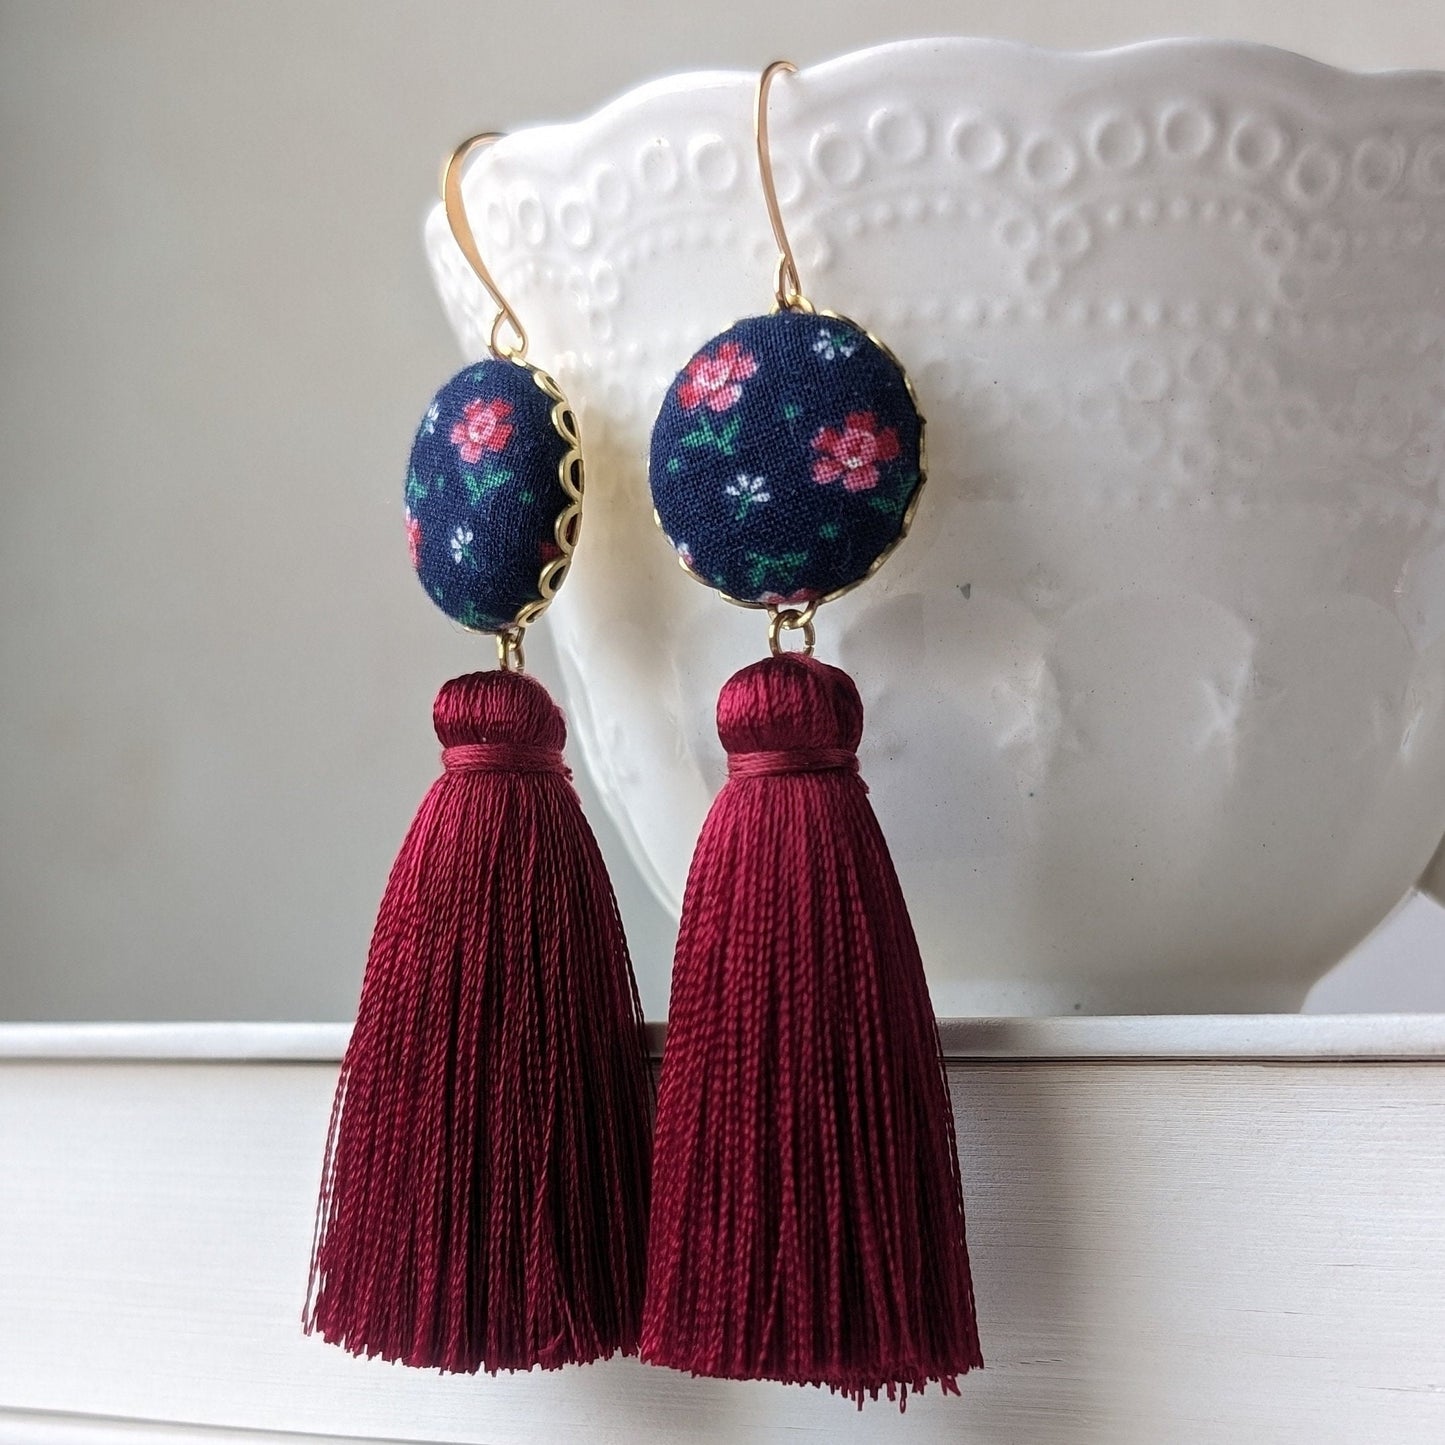 1950s Style Vintage Floral Fabric Earrings With Long Tassels - Navy And Burgundy